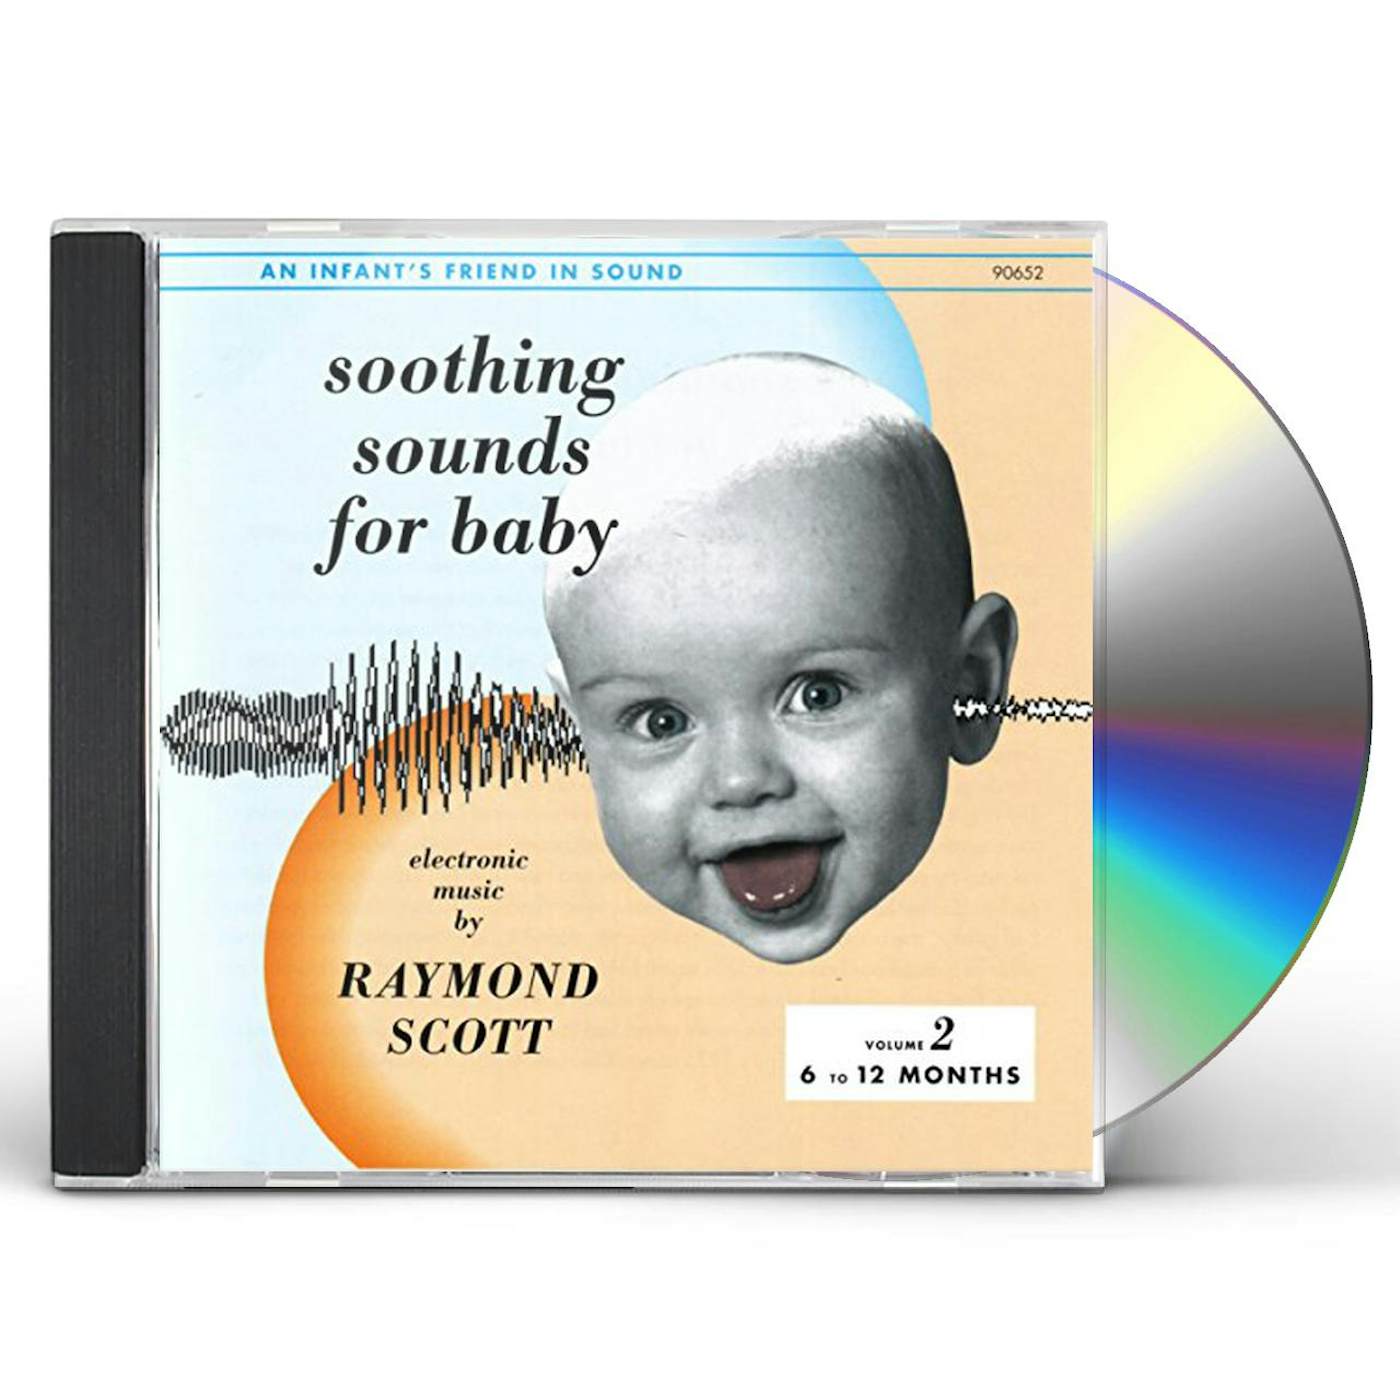 Raymond Scott SOOTHING SOUNDS FOR BABY 2 CD